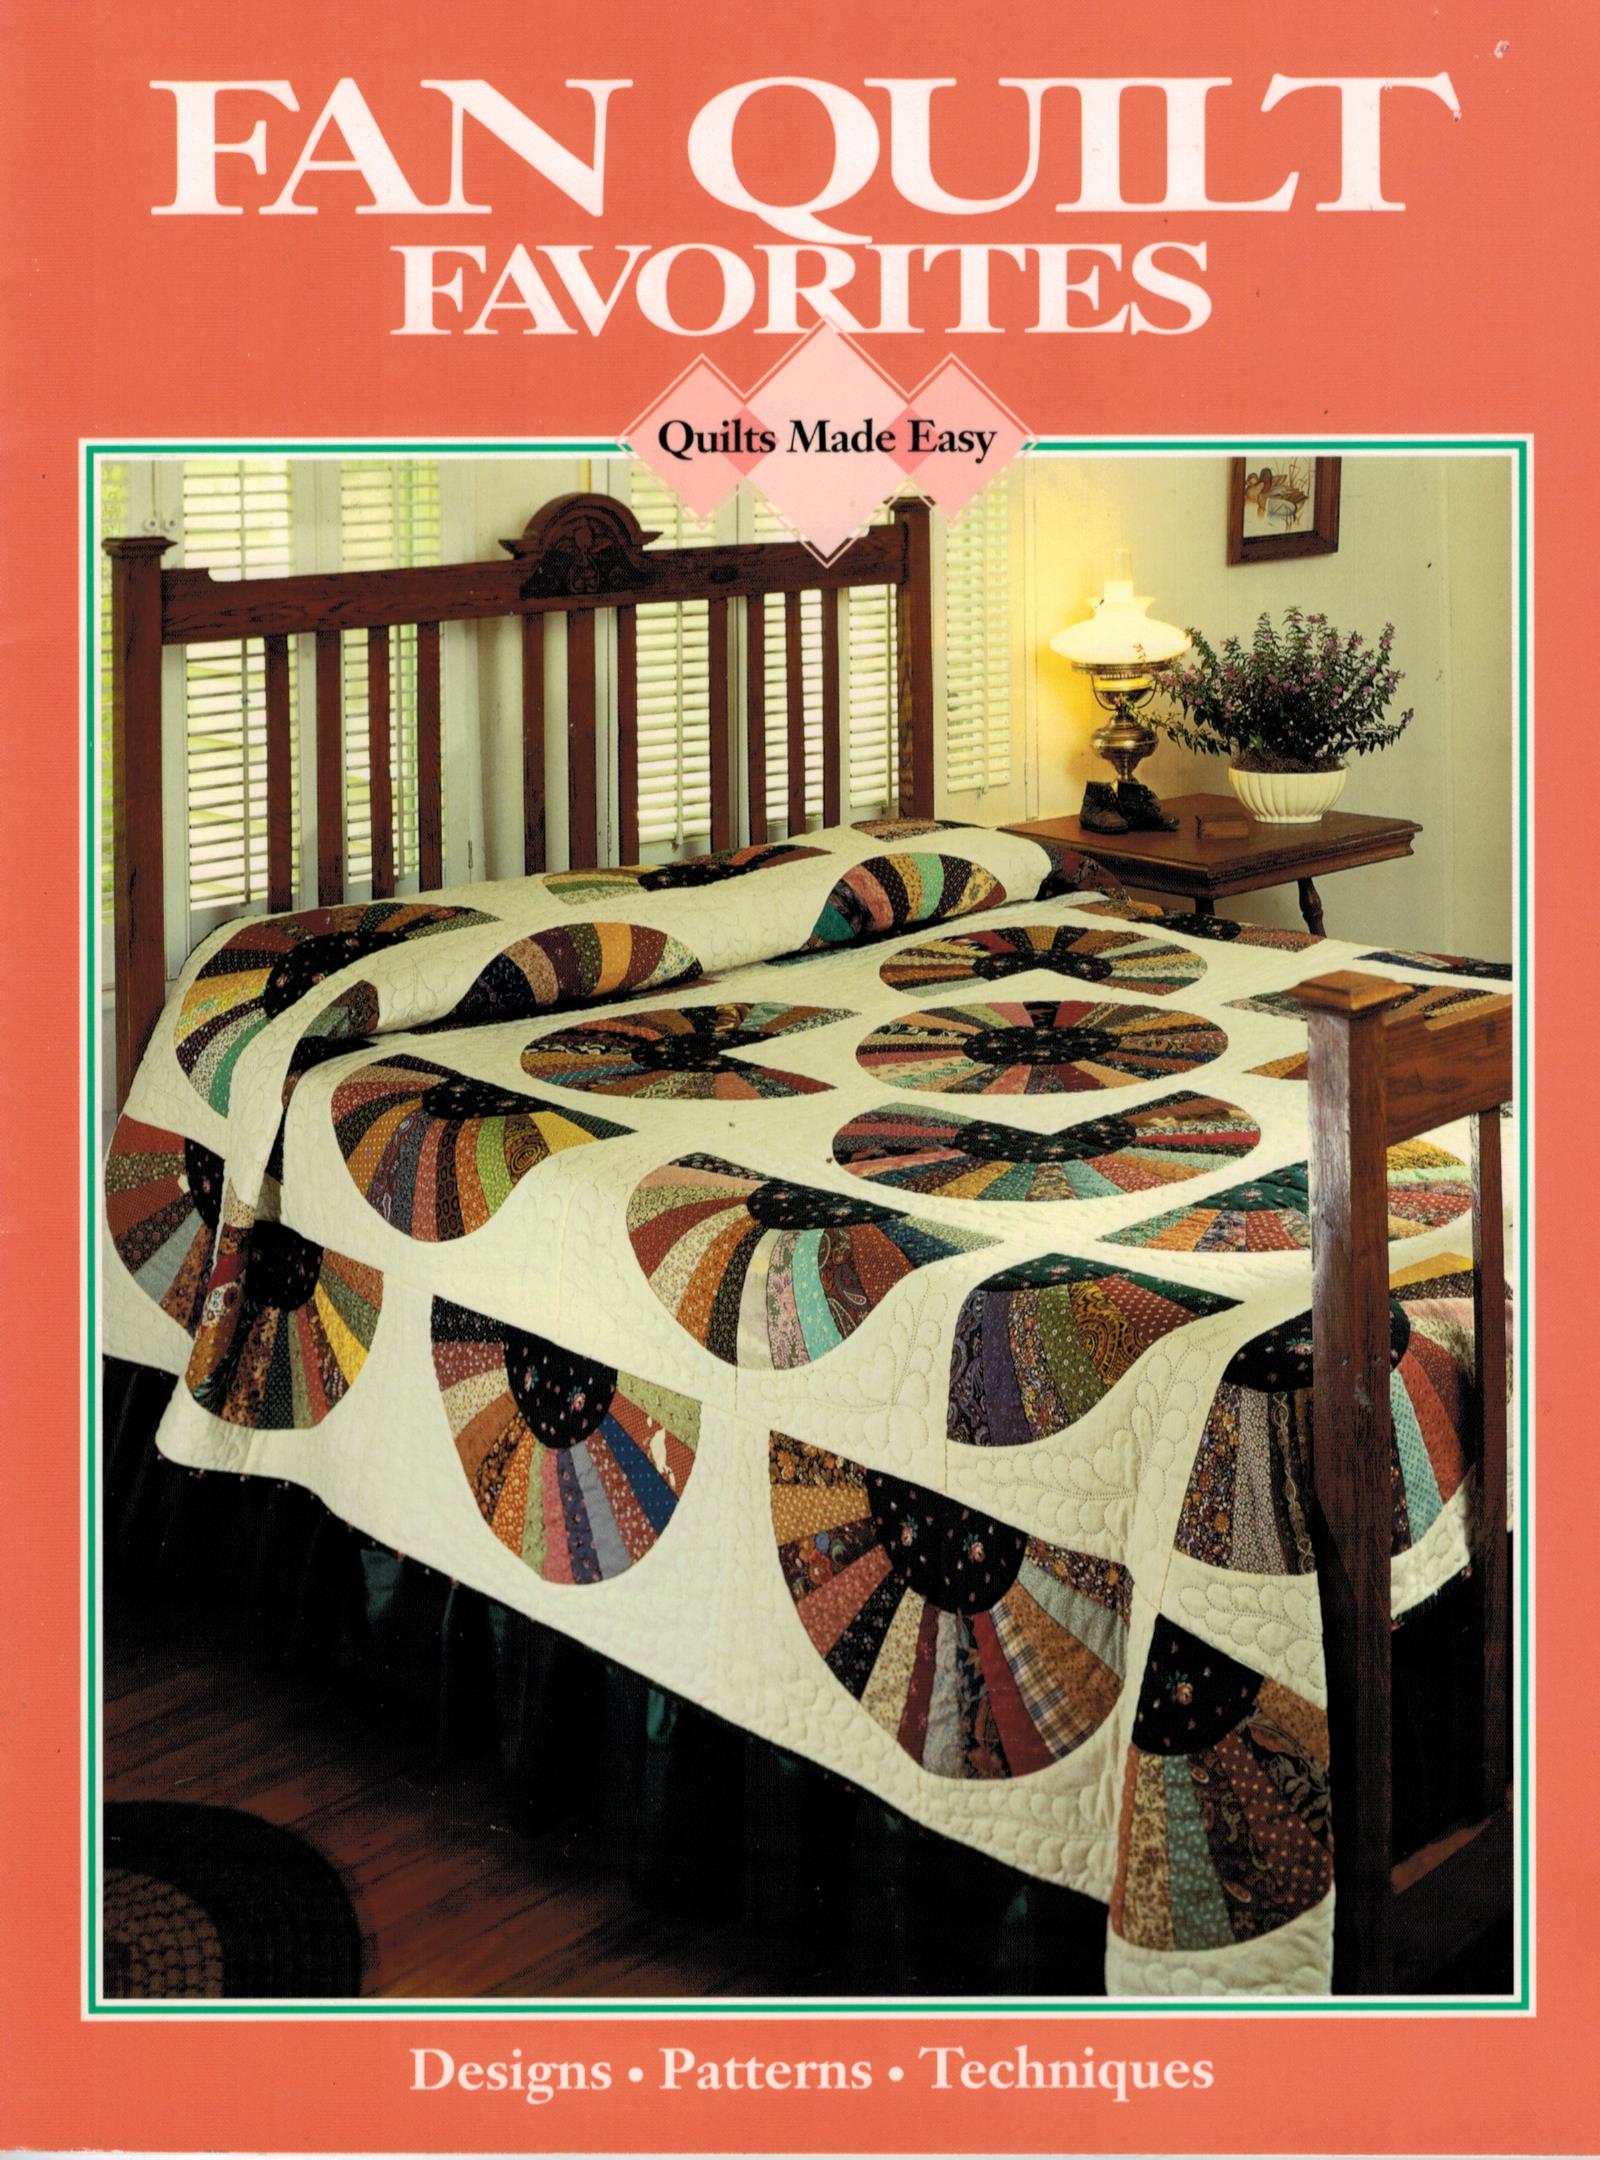 fan-quilt-quilting-pattern-book-quilts-made-easy-10-designs-and-full